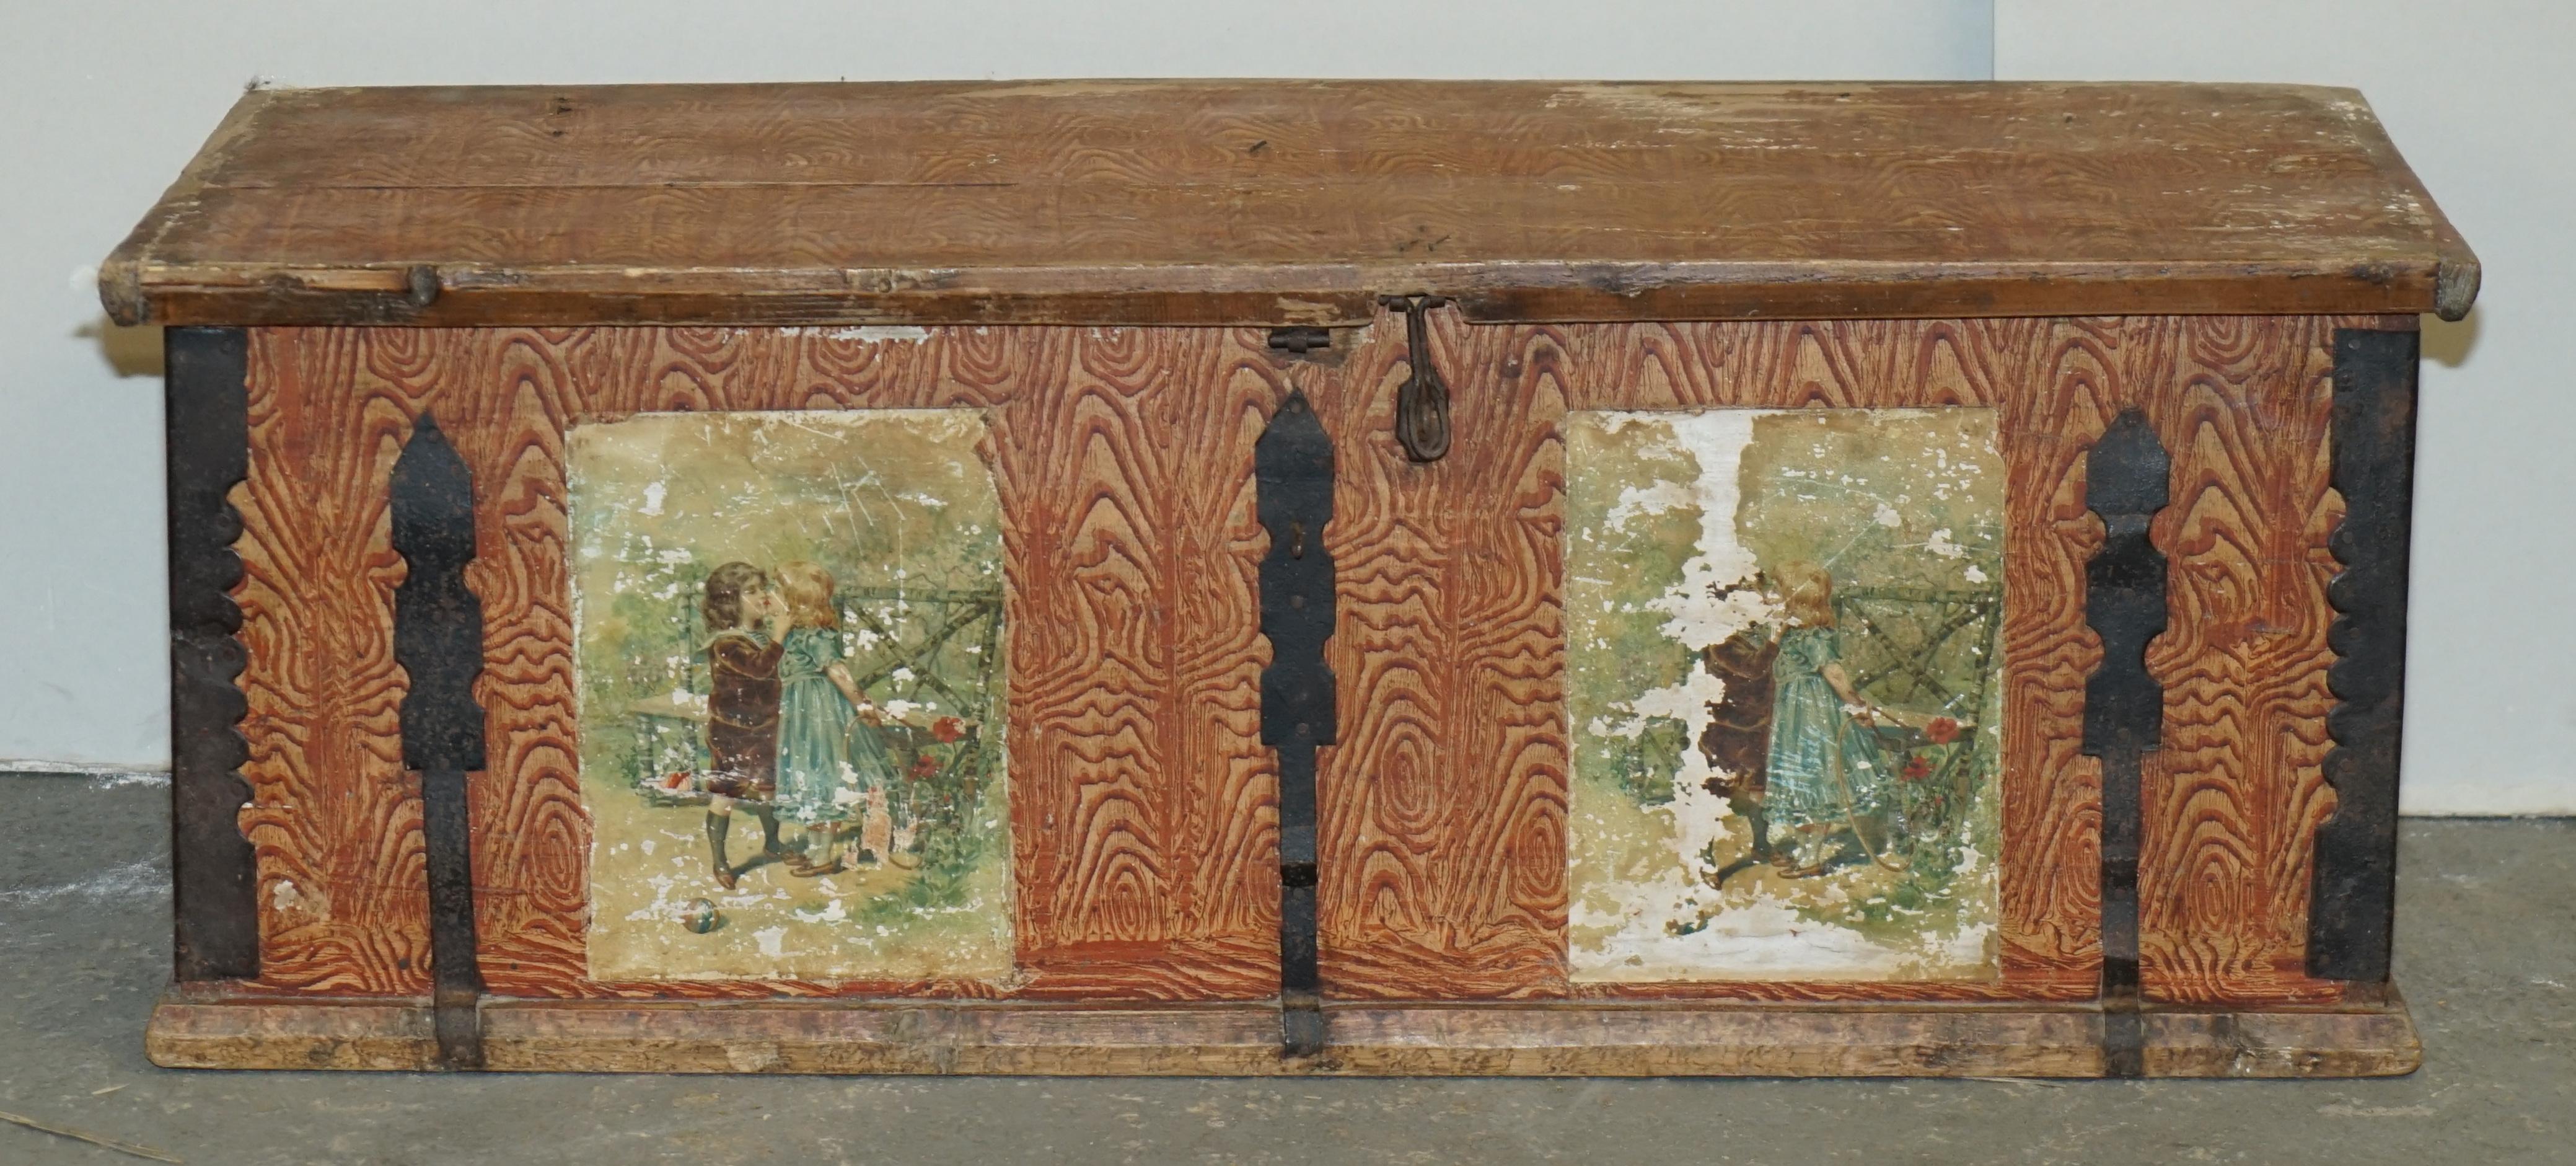 We are delighted to offer for sale this stunning, circa 1900 hand painted Romanian clothes trunk or marriage coffer chest depicting Children's portraits and tiger oak paintings 

I have recently purchased a very large collection of these original,